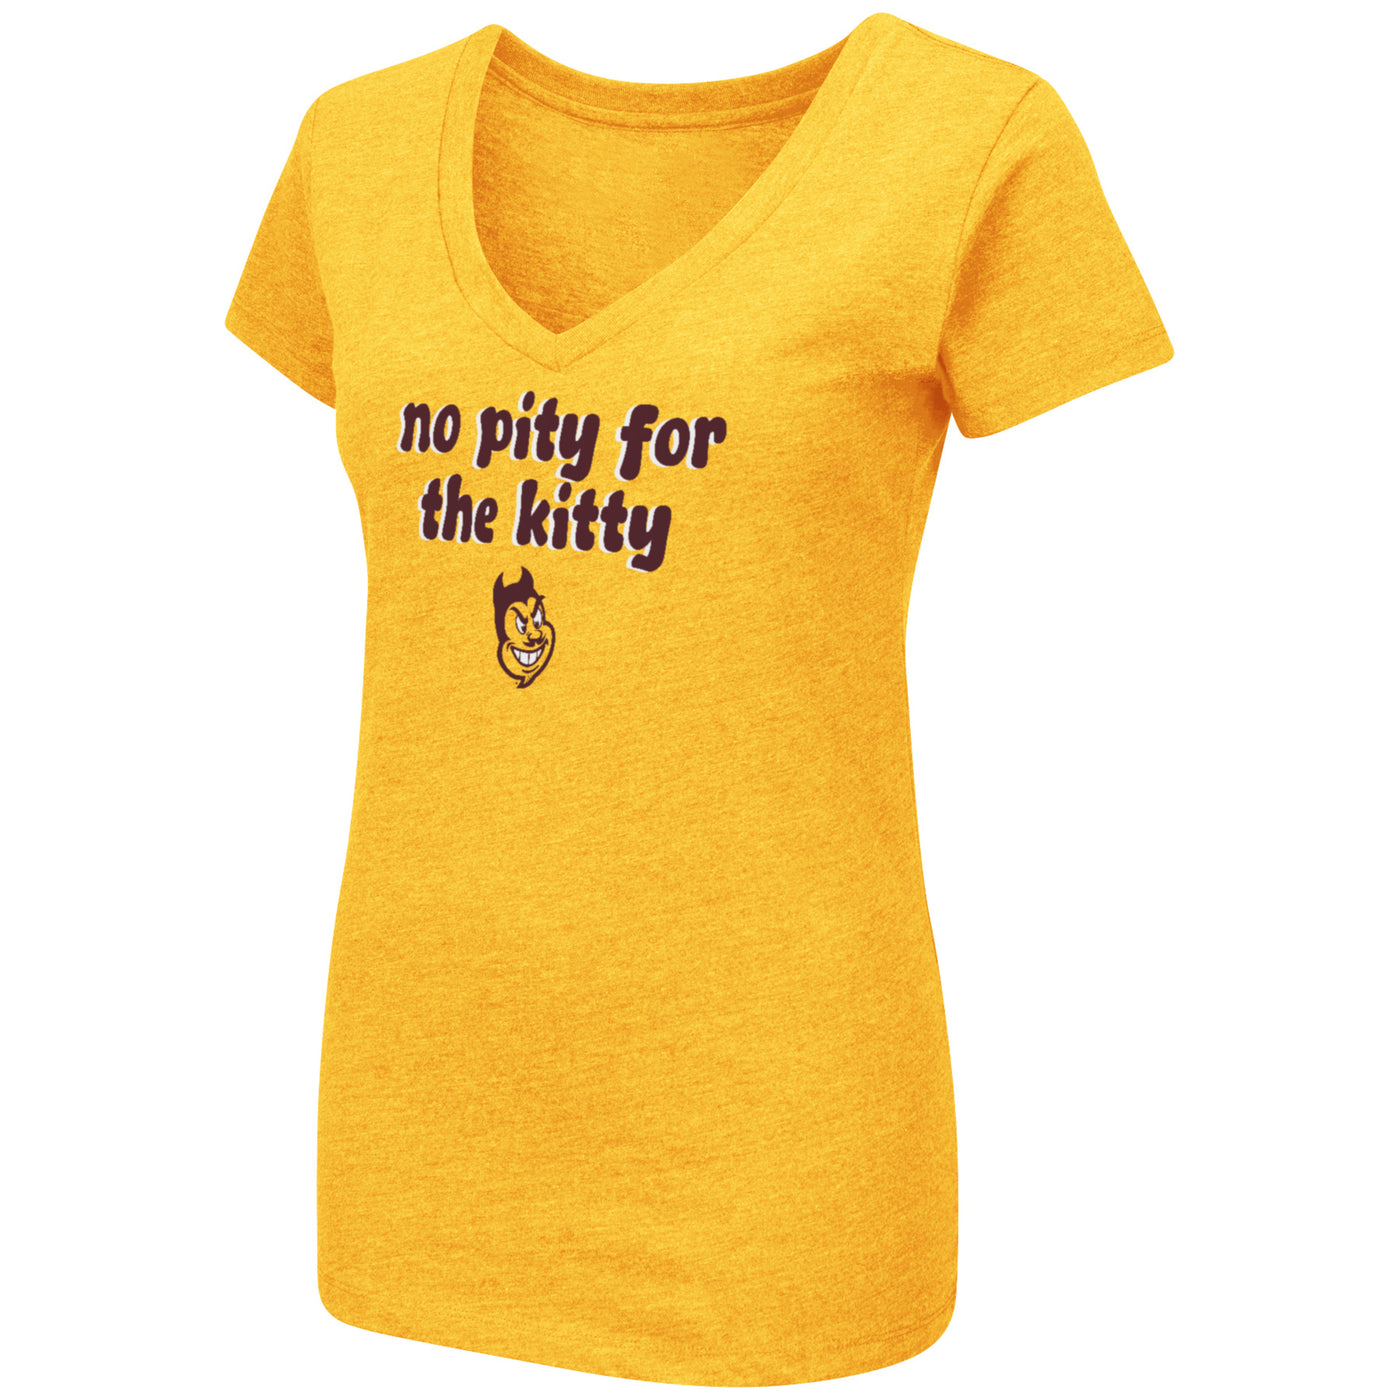 ASU gold womens V-neck shirt with the text 